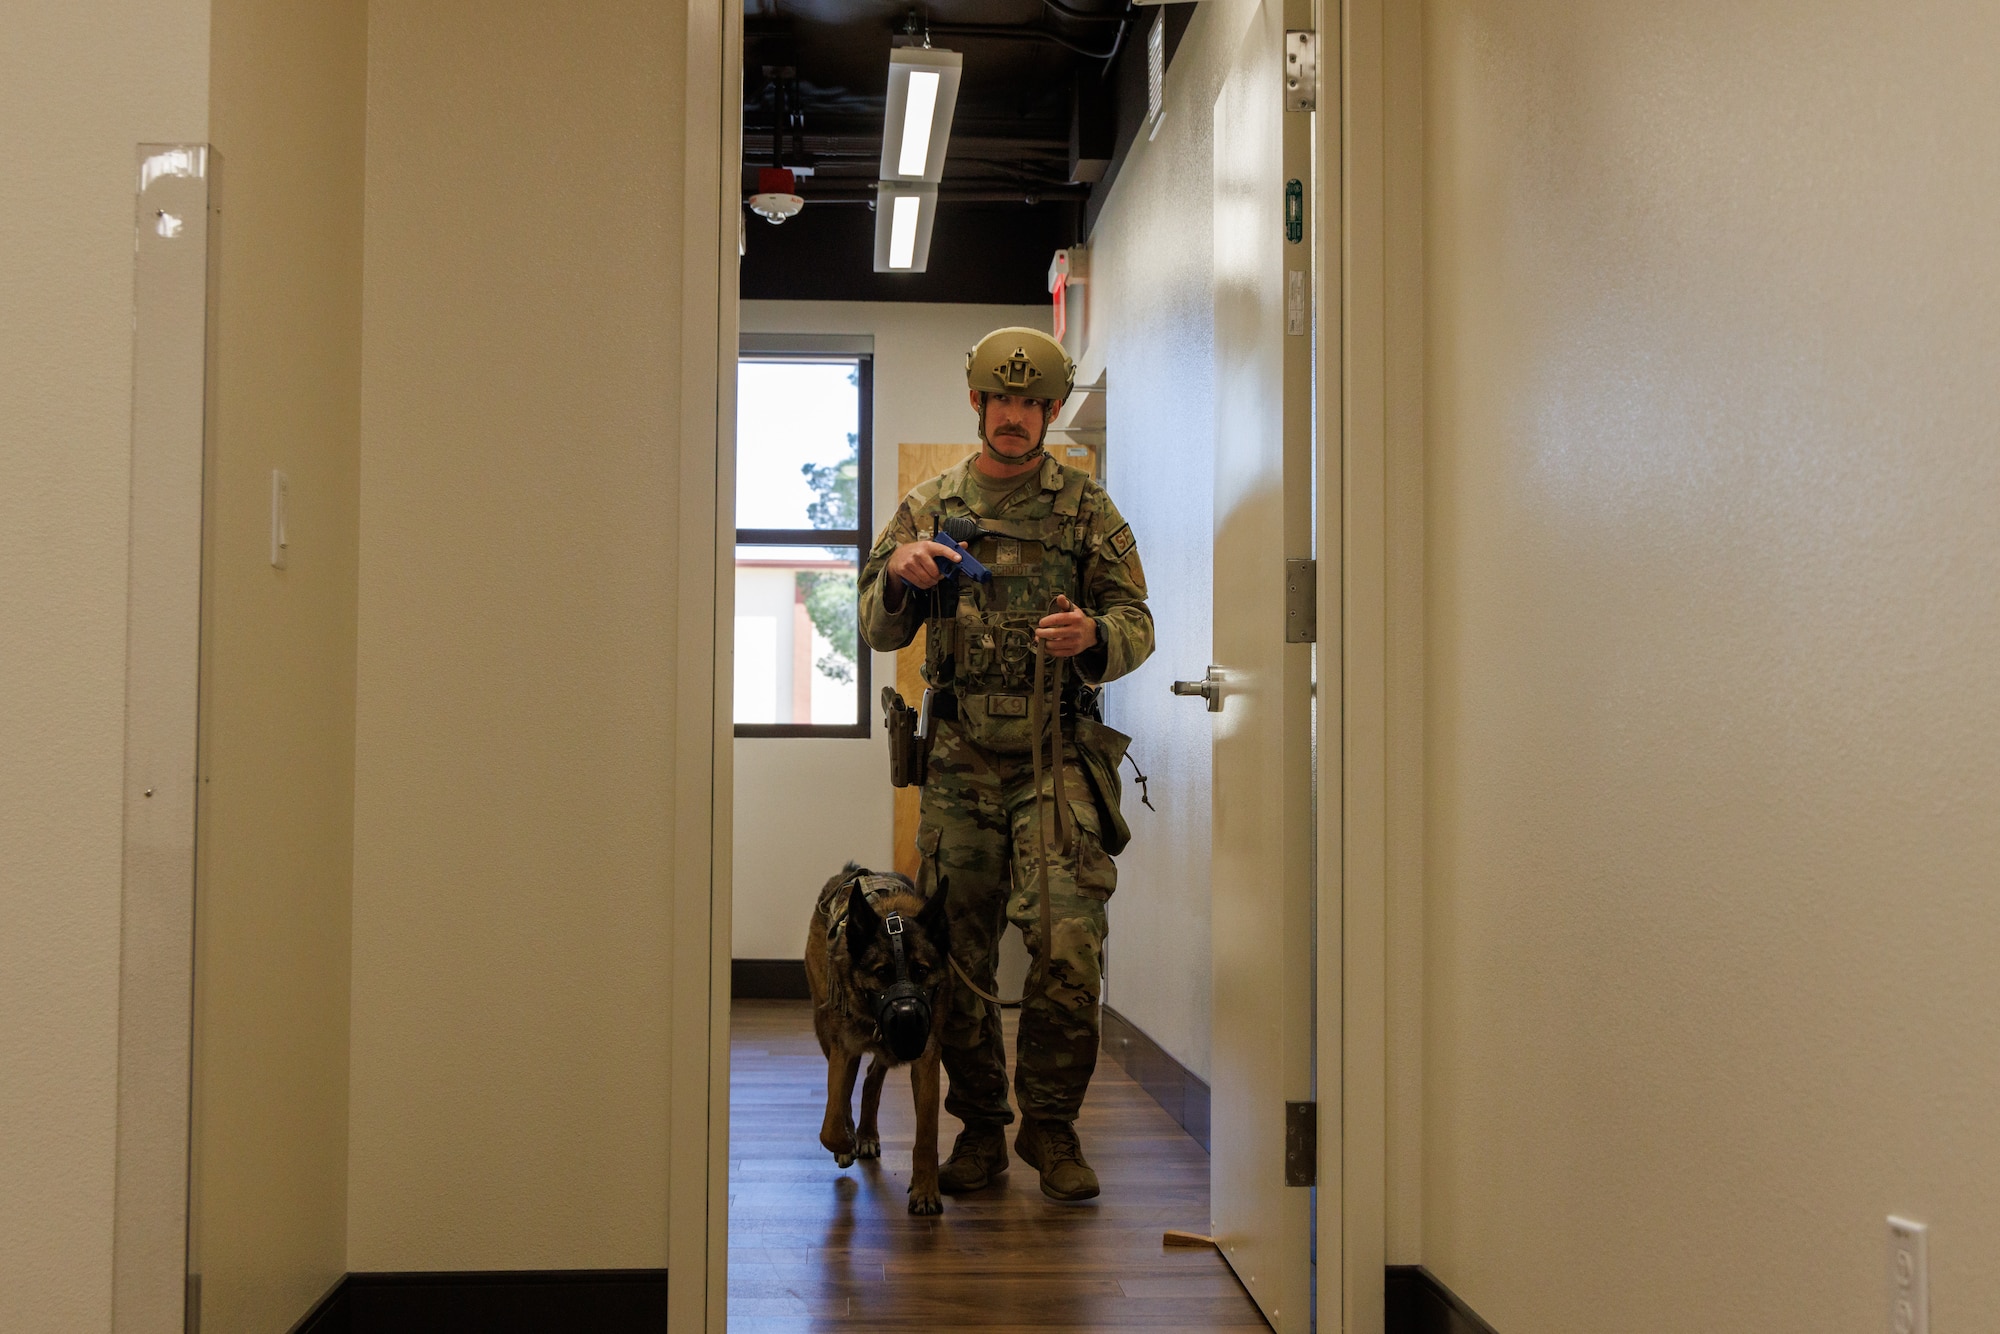 412th Security Forces Squadron members inspect a building during an active shooter exercise at Edwards Air Force Base, California, March 7. (Air Force photo by C.J. Raterman)